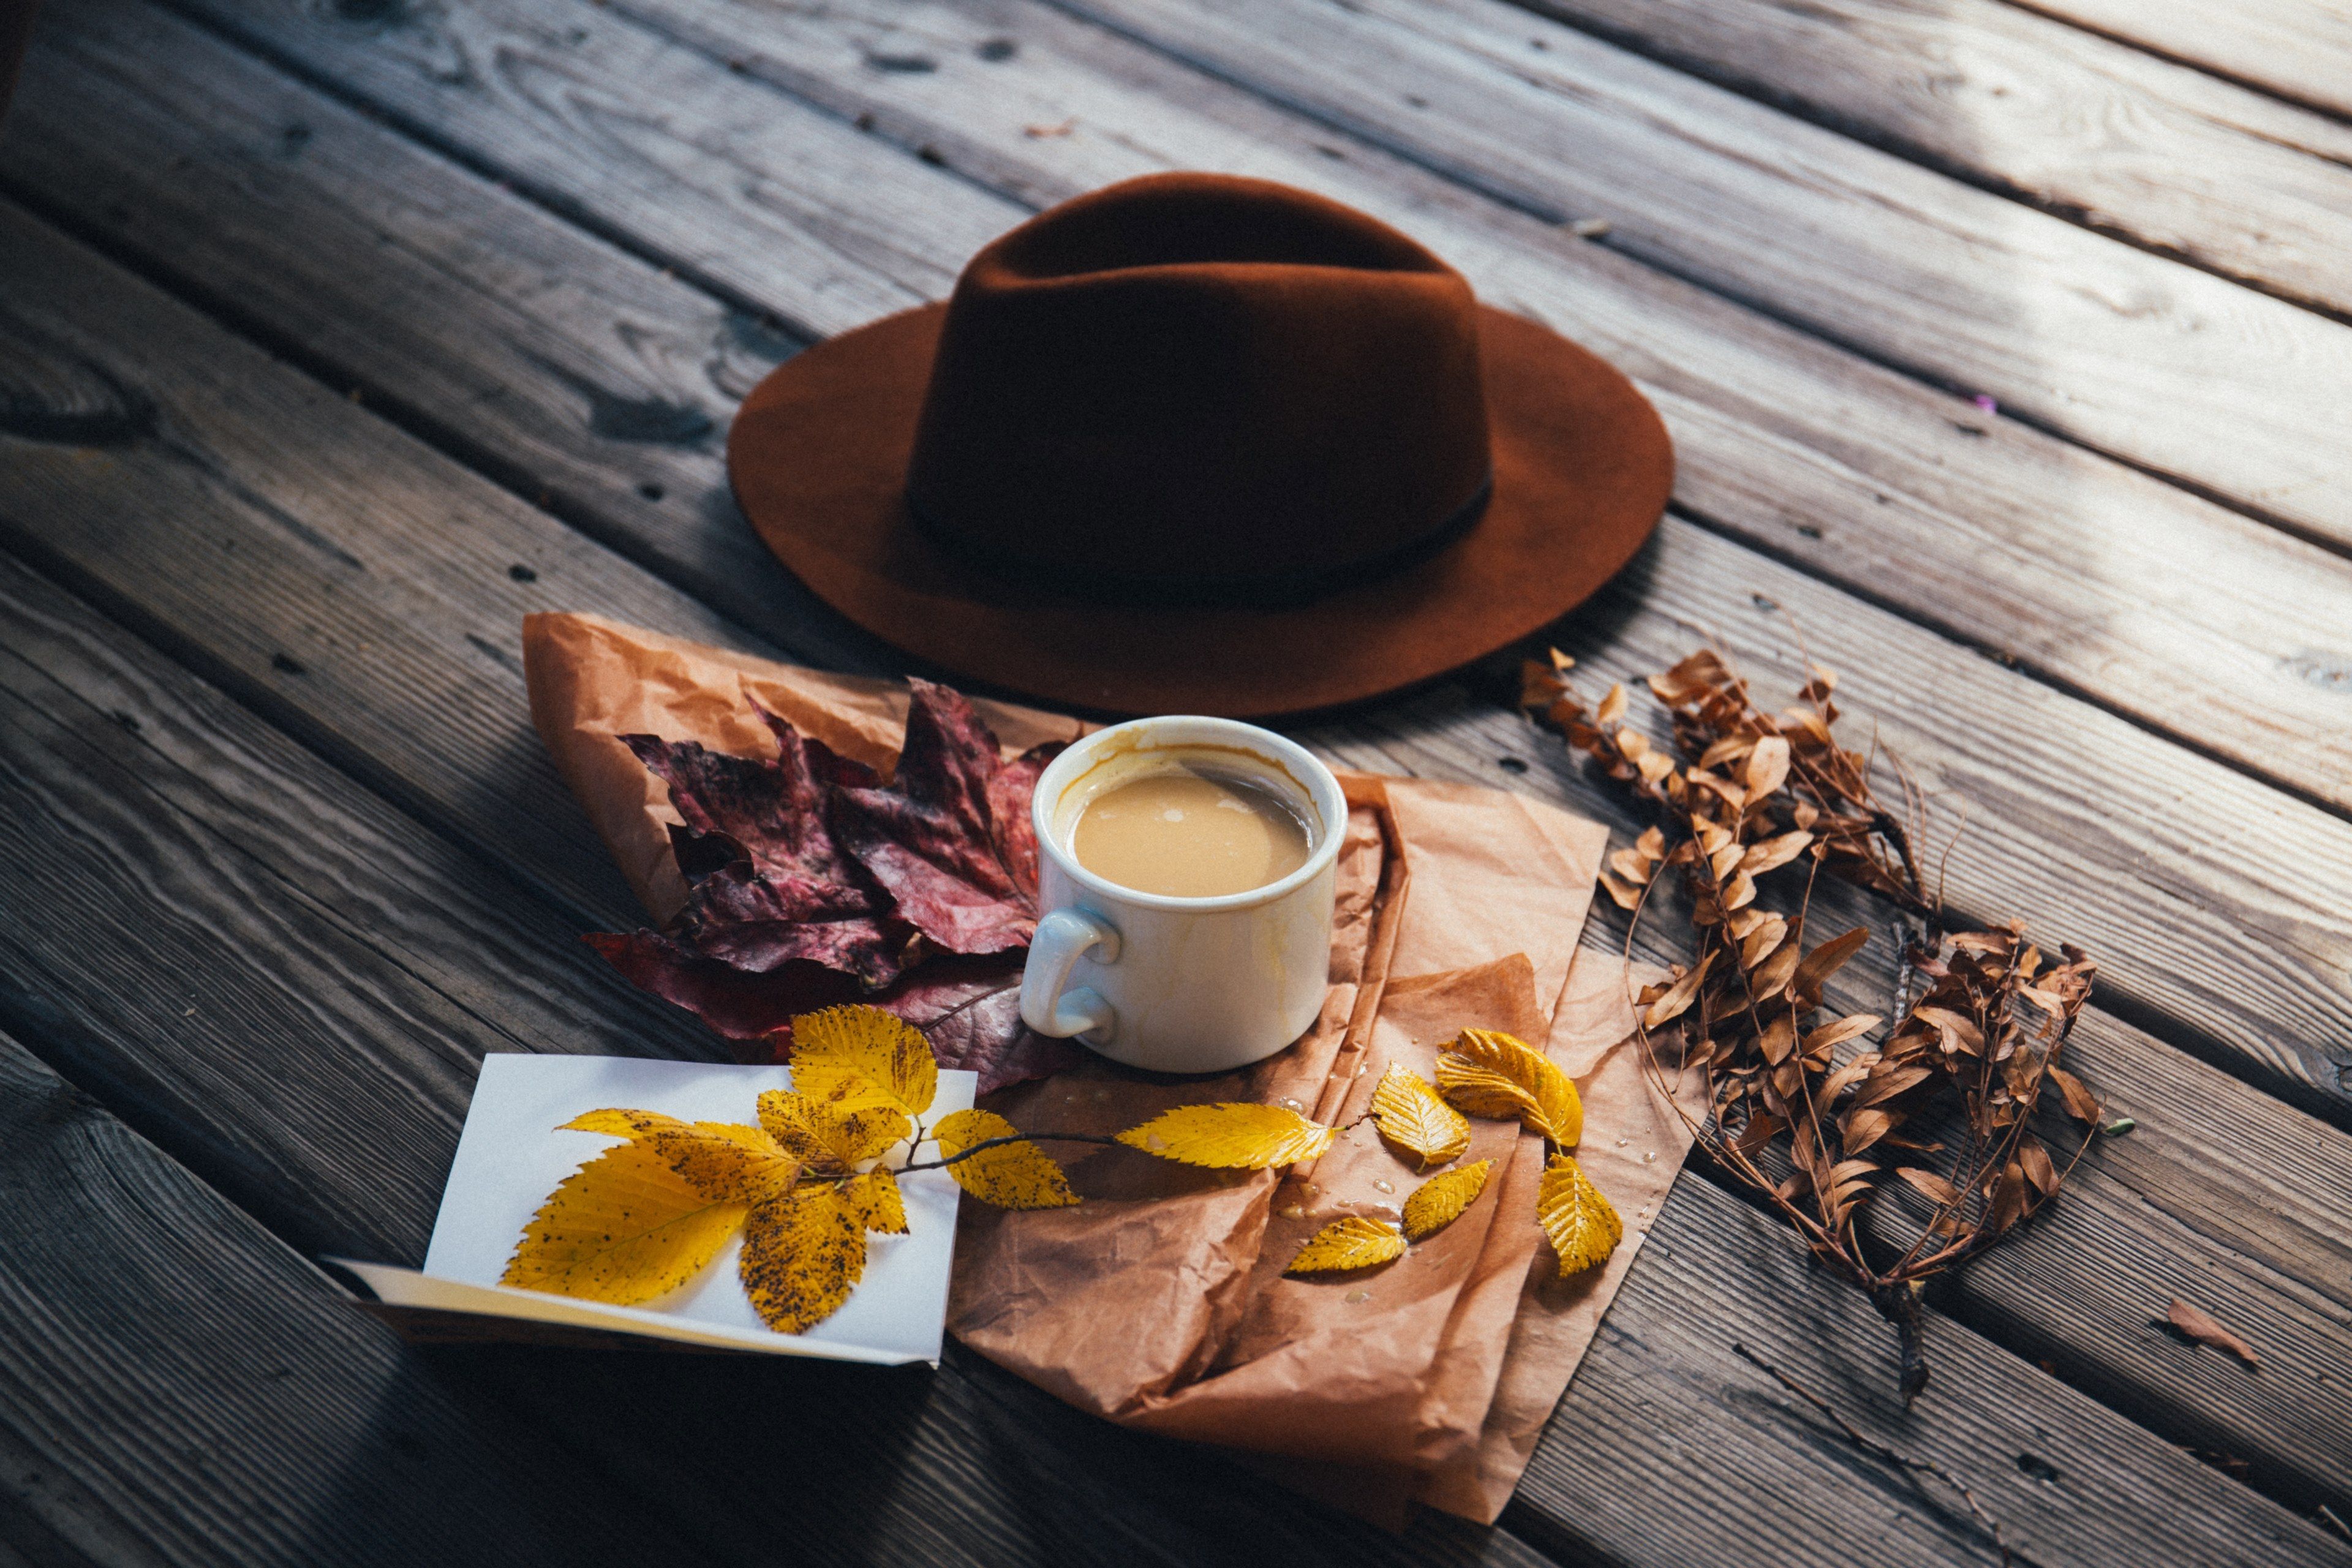 Wallpaper / a brown cowboy hat a cup of coffee and autumn leaves laid out on a wooden surface, hat leaves and coffee in flatlay 4k wallpaper